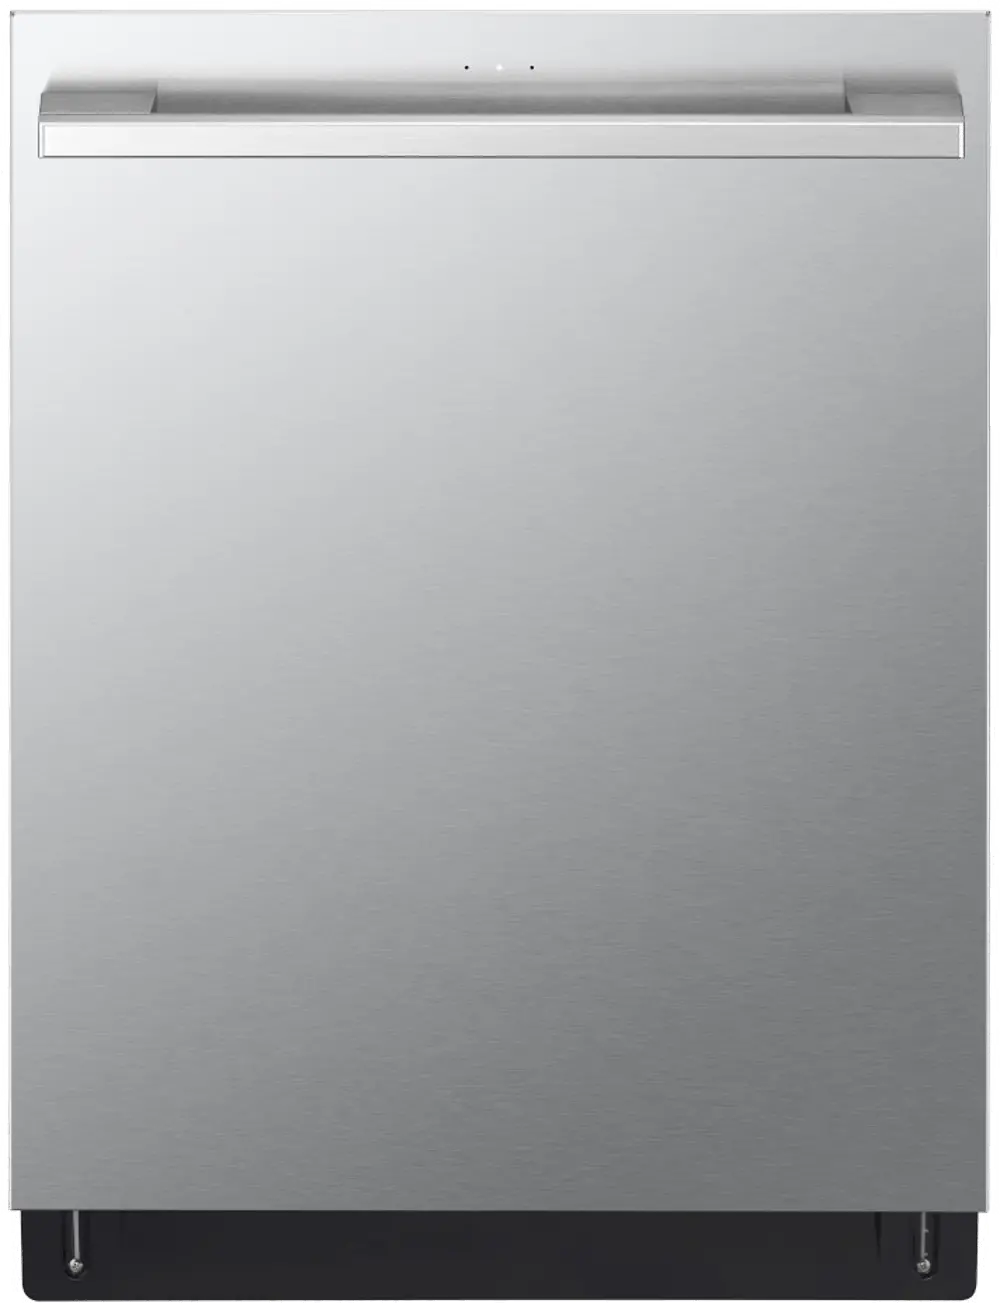 SDWB24S3 LG Studio Top Control Dishwasher - Stainless Steel-1